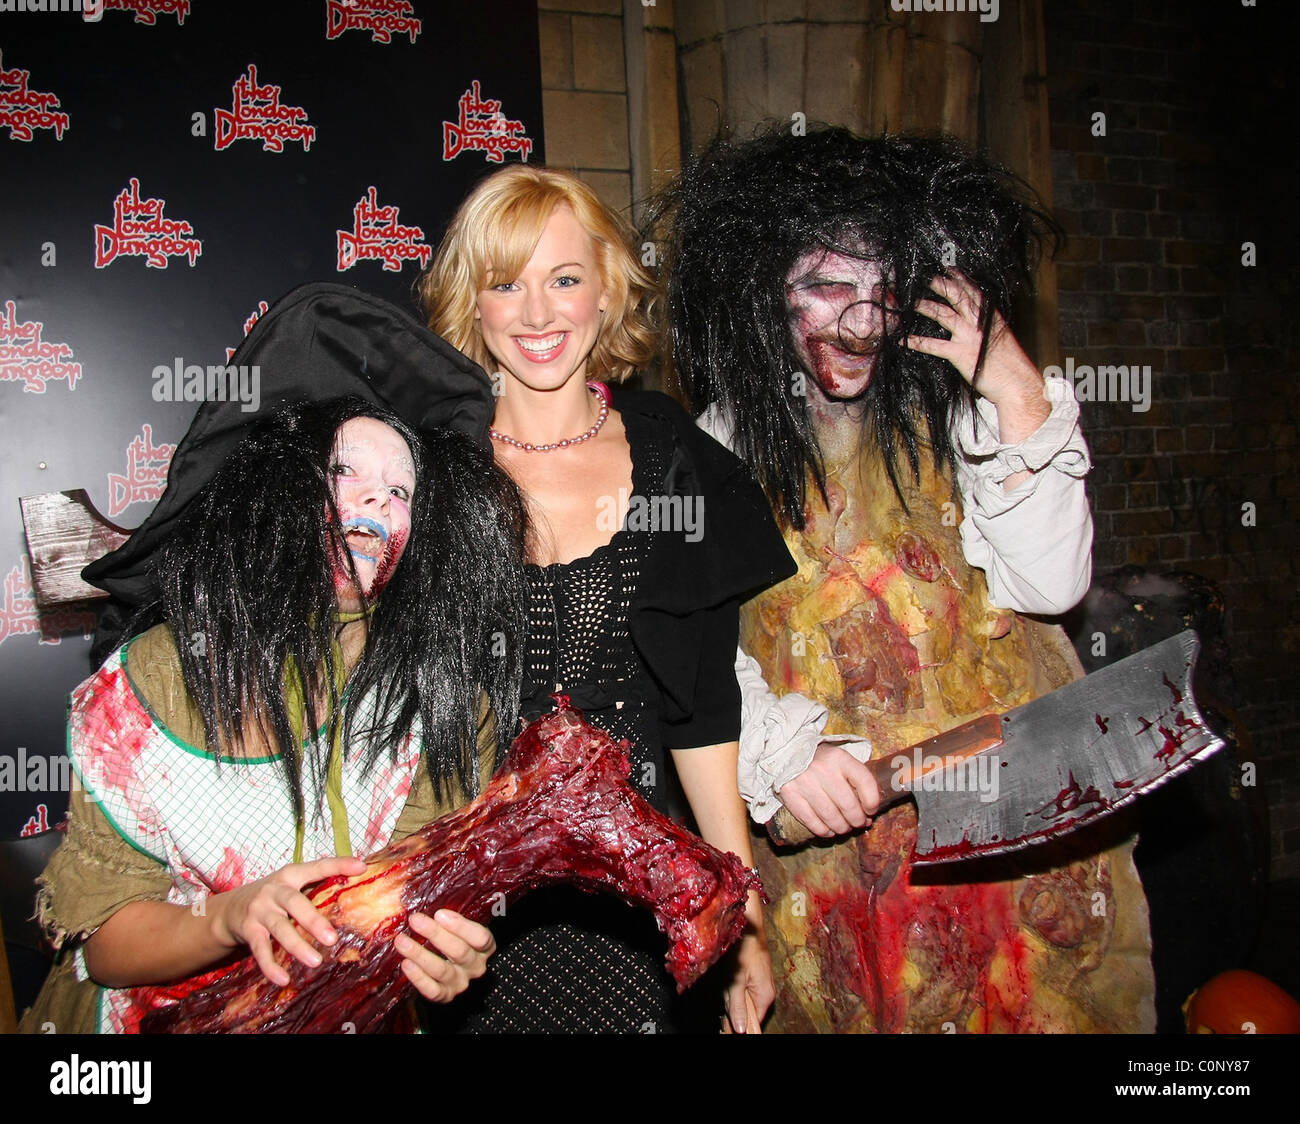 Sarah Manners London Dungeon Fear-Fest launch party London, England - 14.10.08 Stock Photo